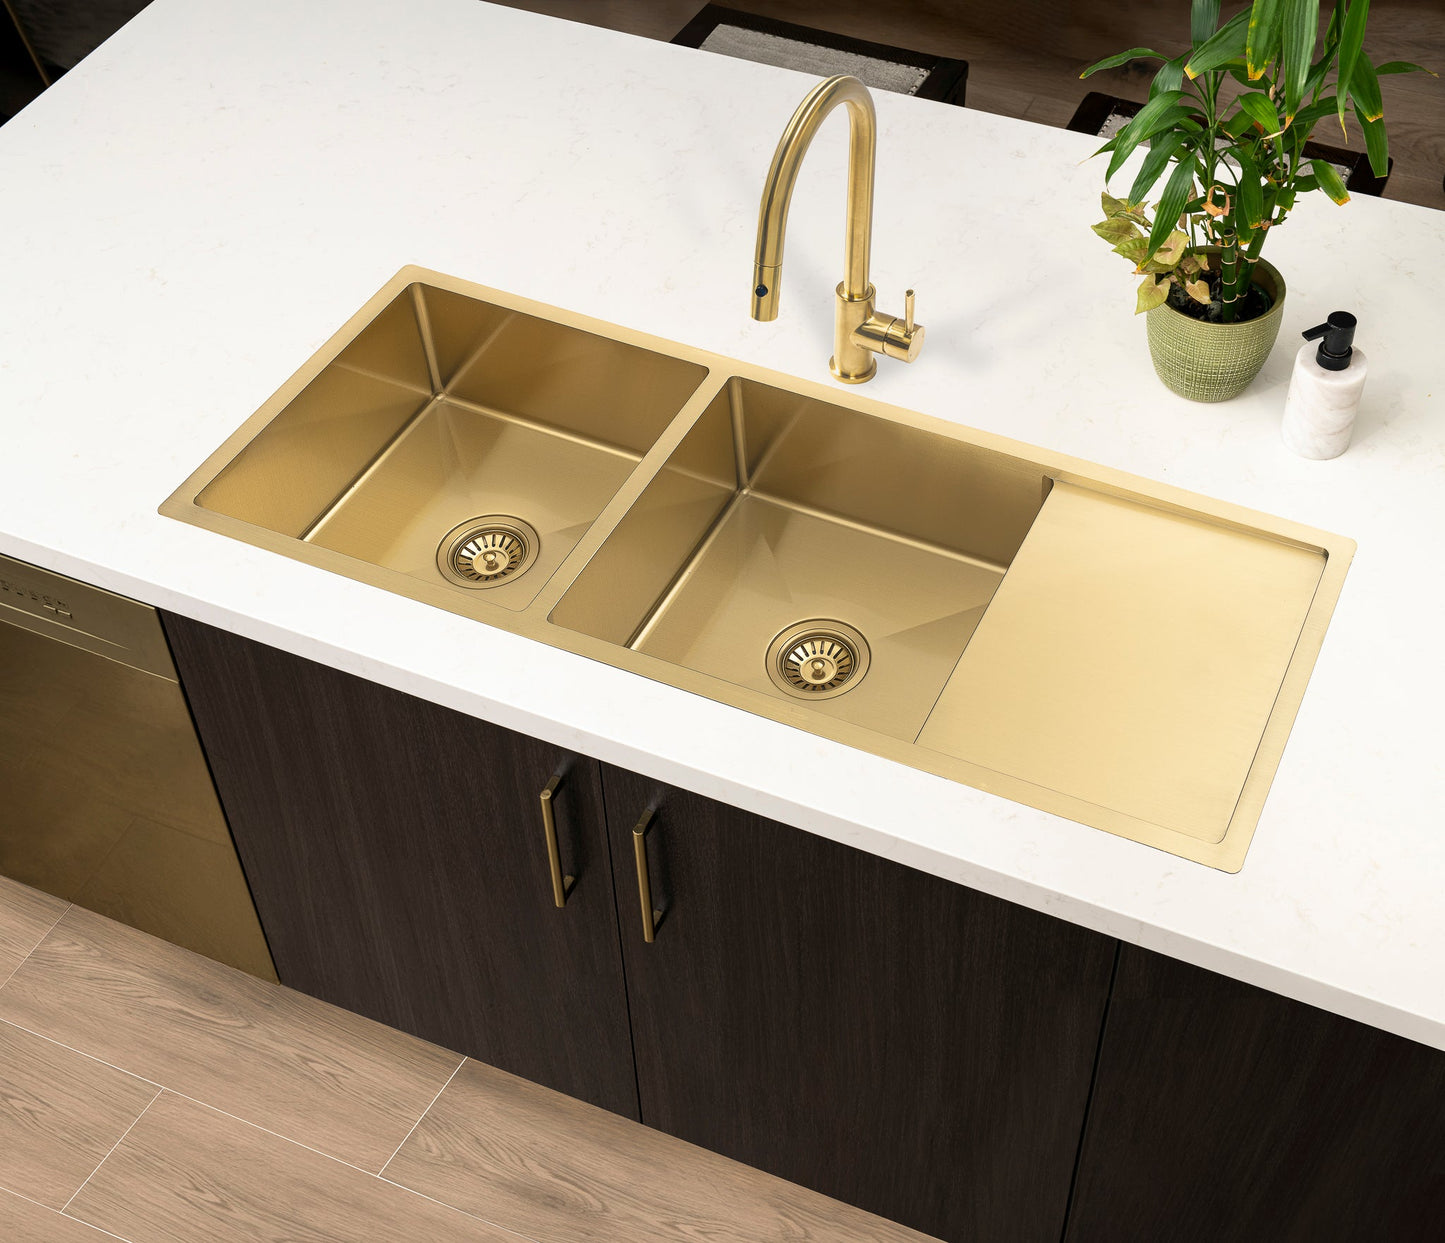 Retto II 1190mm x 450mm x 230mm Stainless Steel Double Sink with Drainer, Brushed Brass Gold